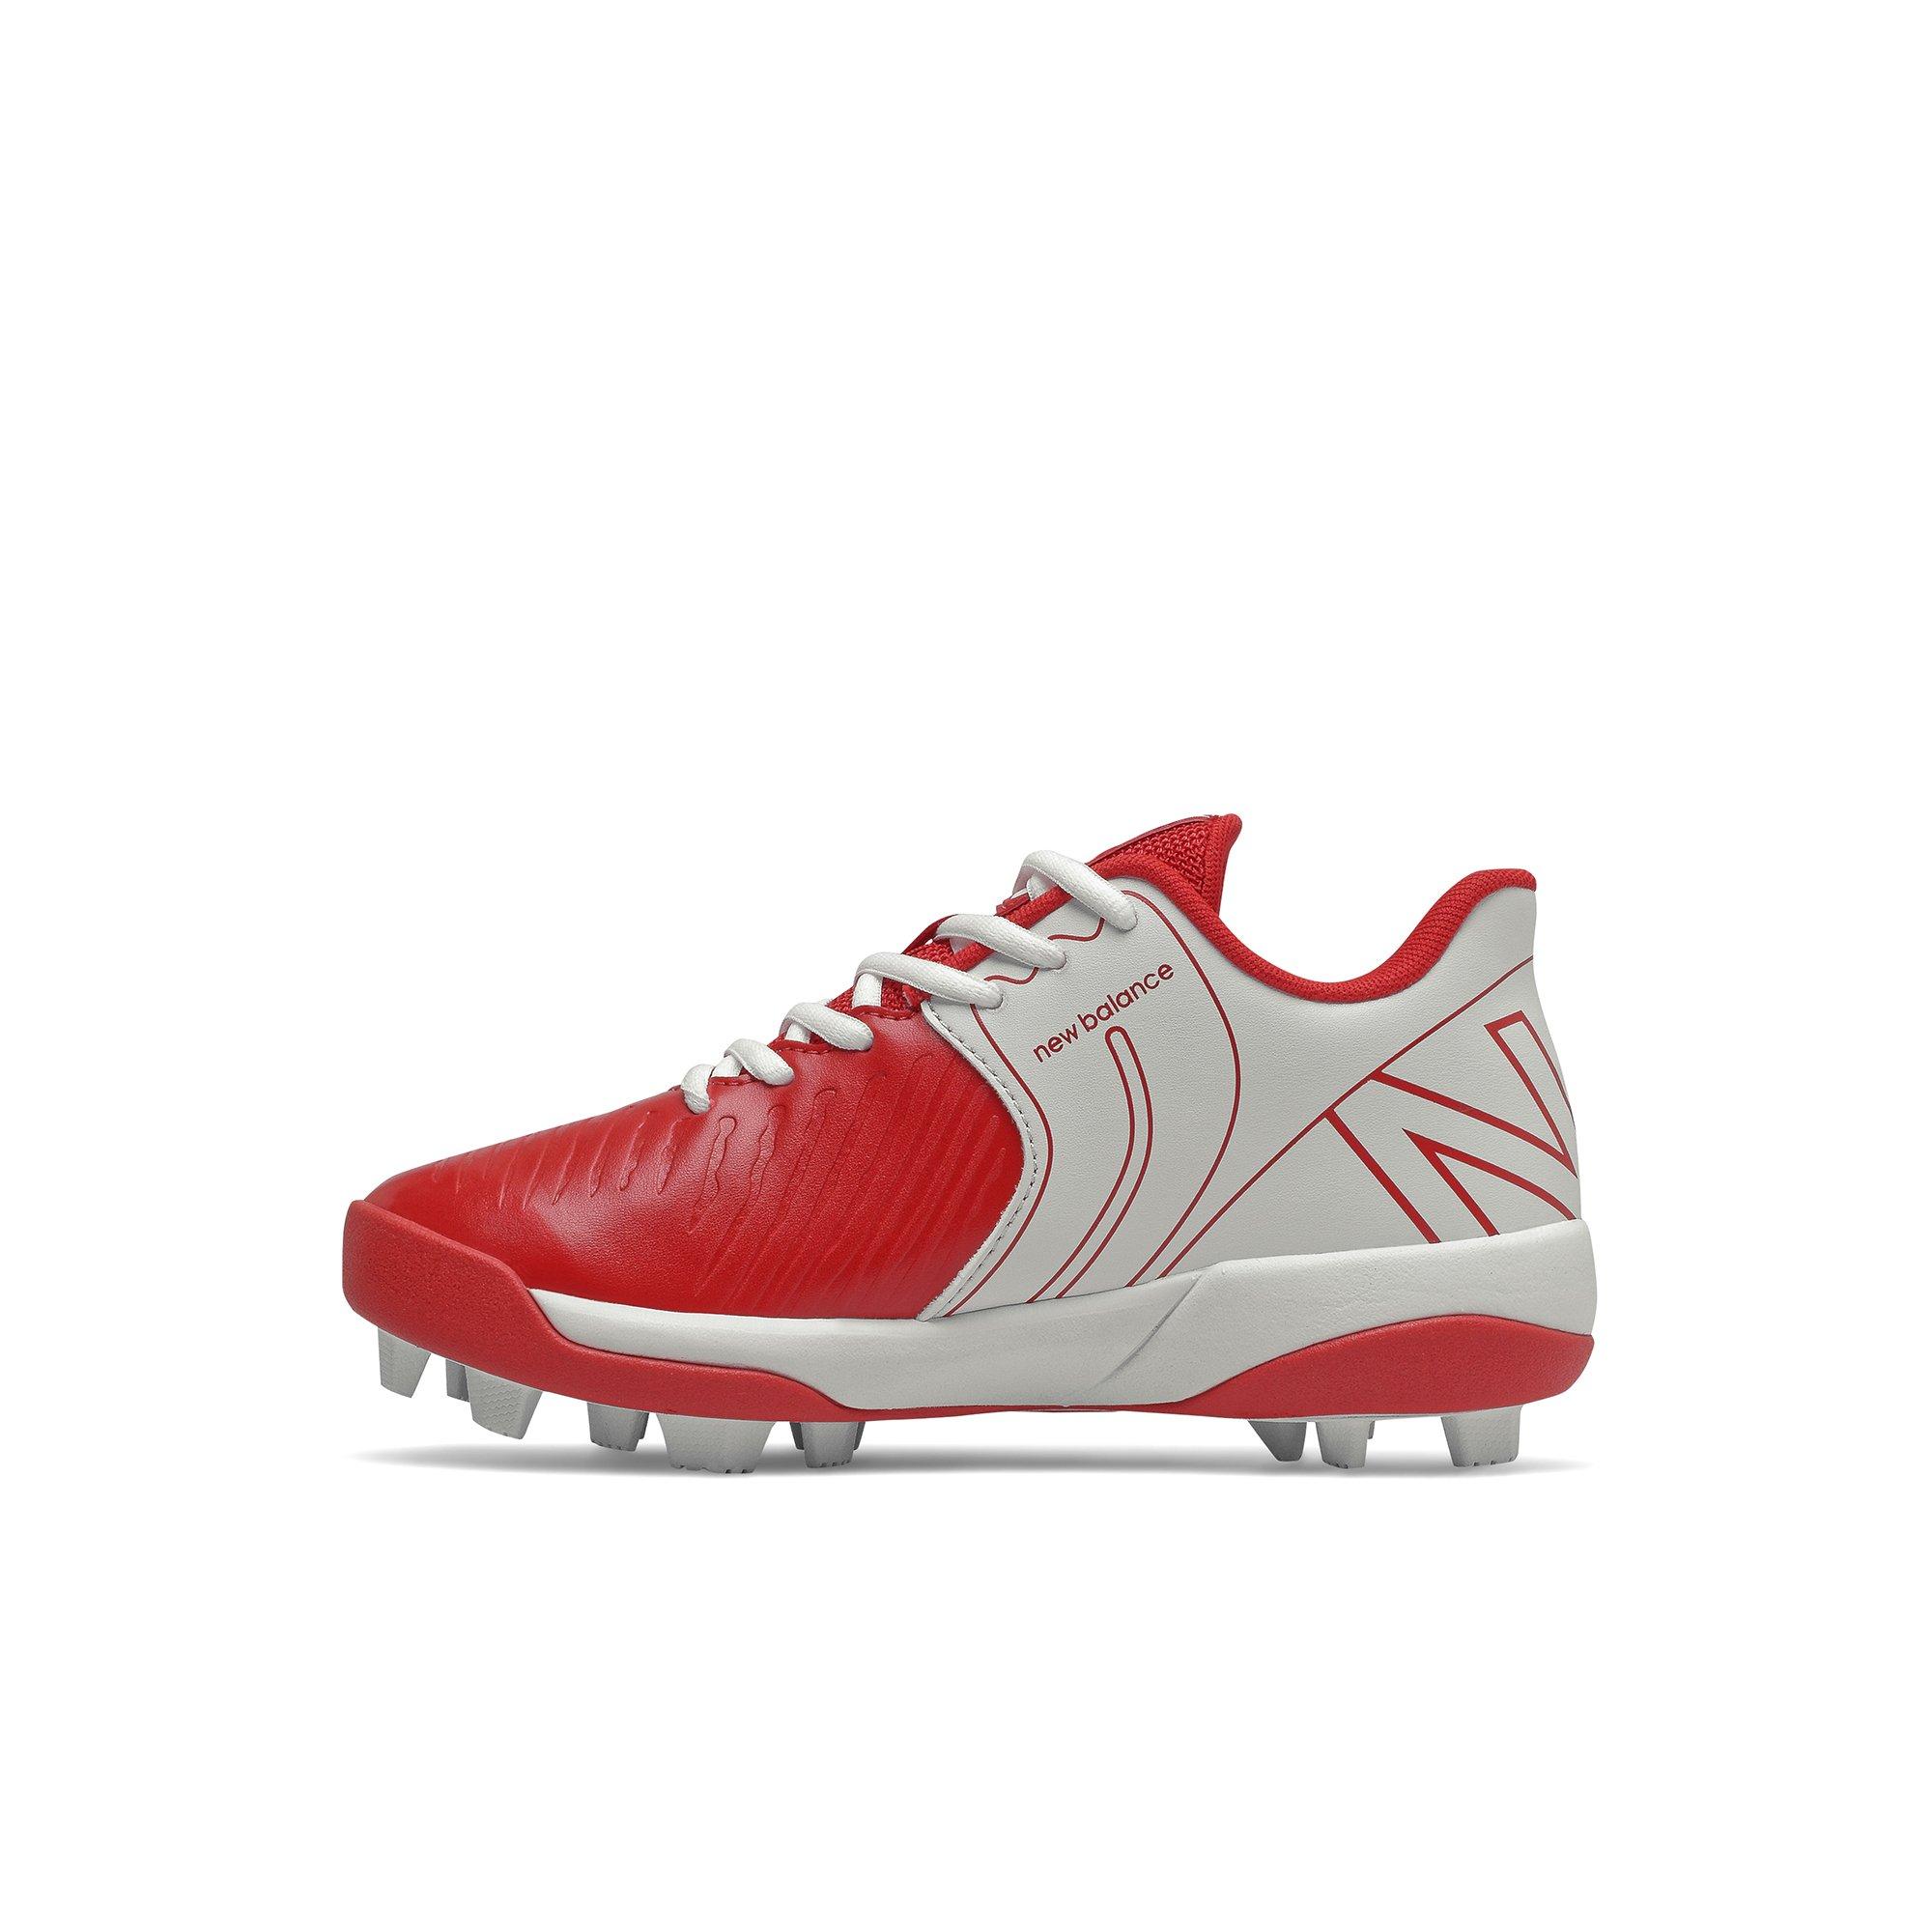 Red new balance cleats